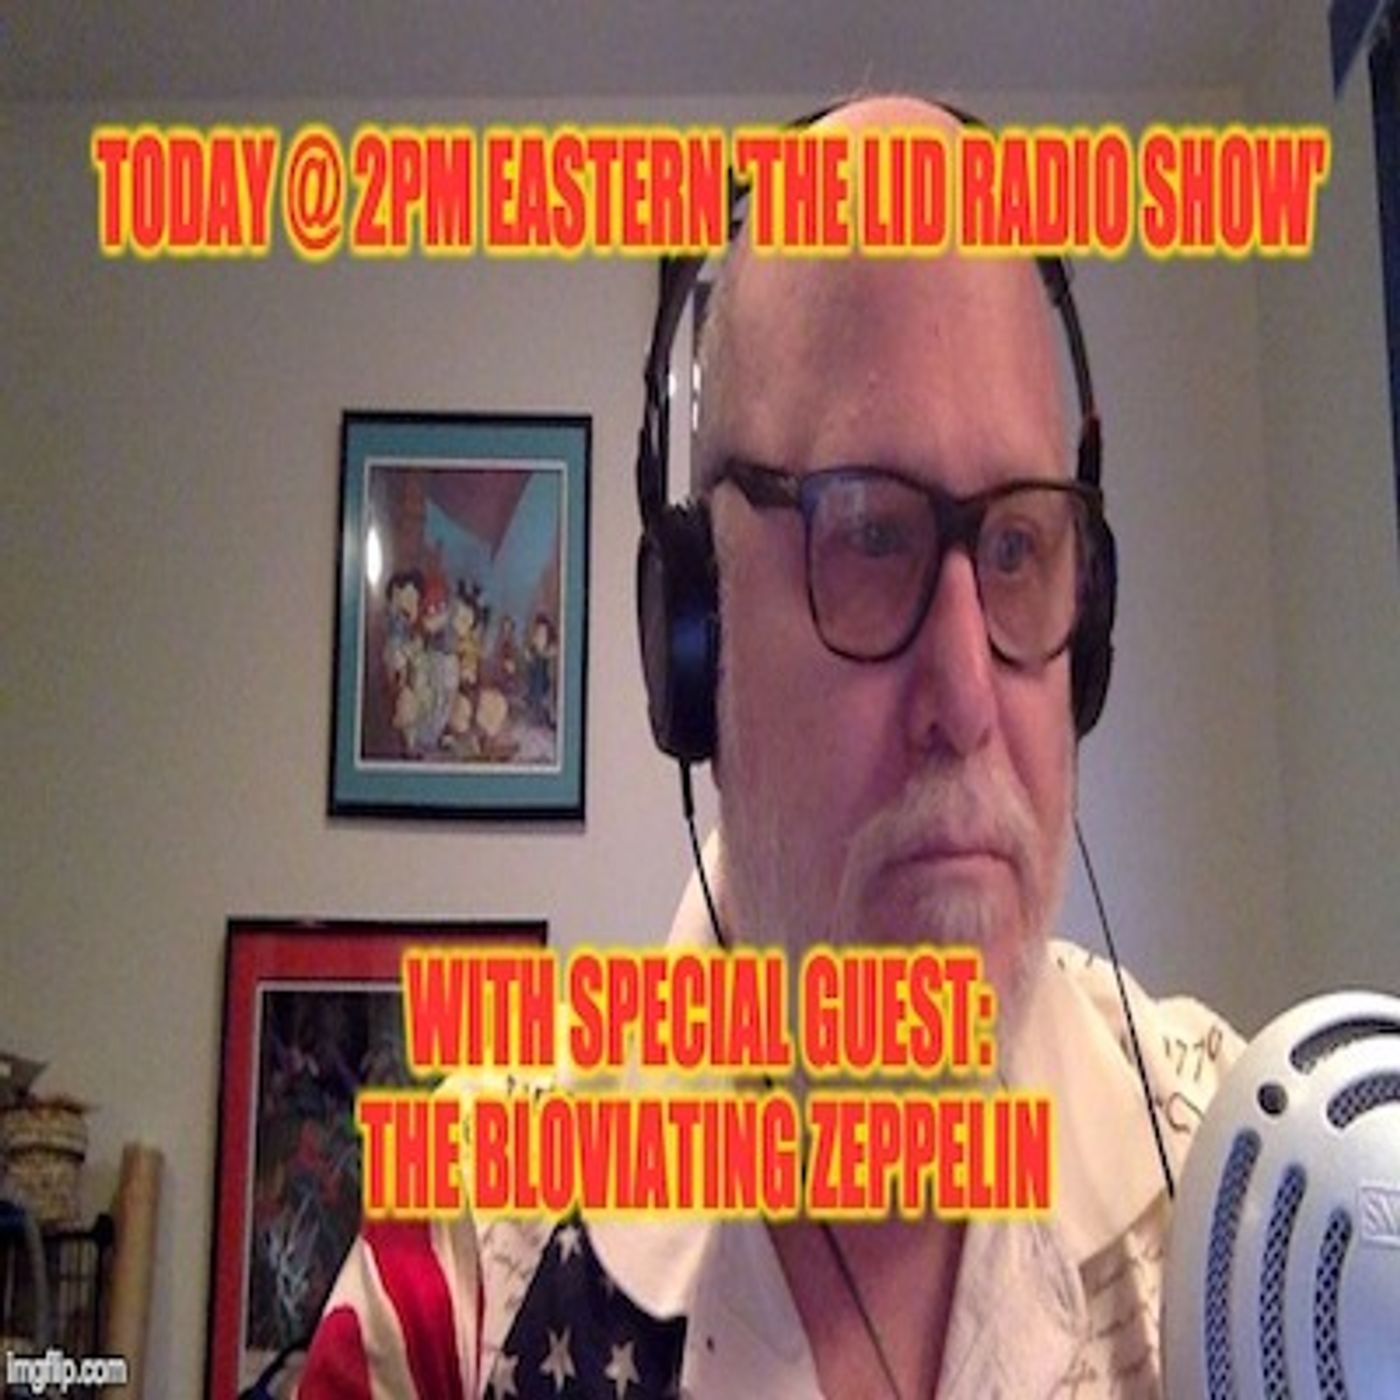 Lid Radio Show 2/1/17 With Guest Bloviating Zeppelin